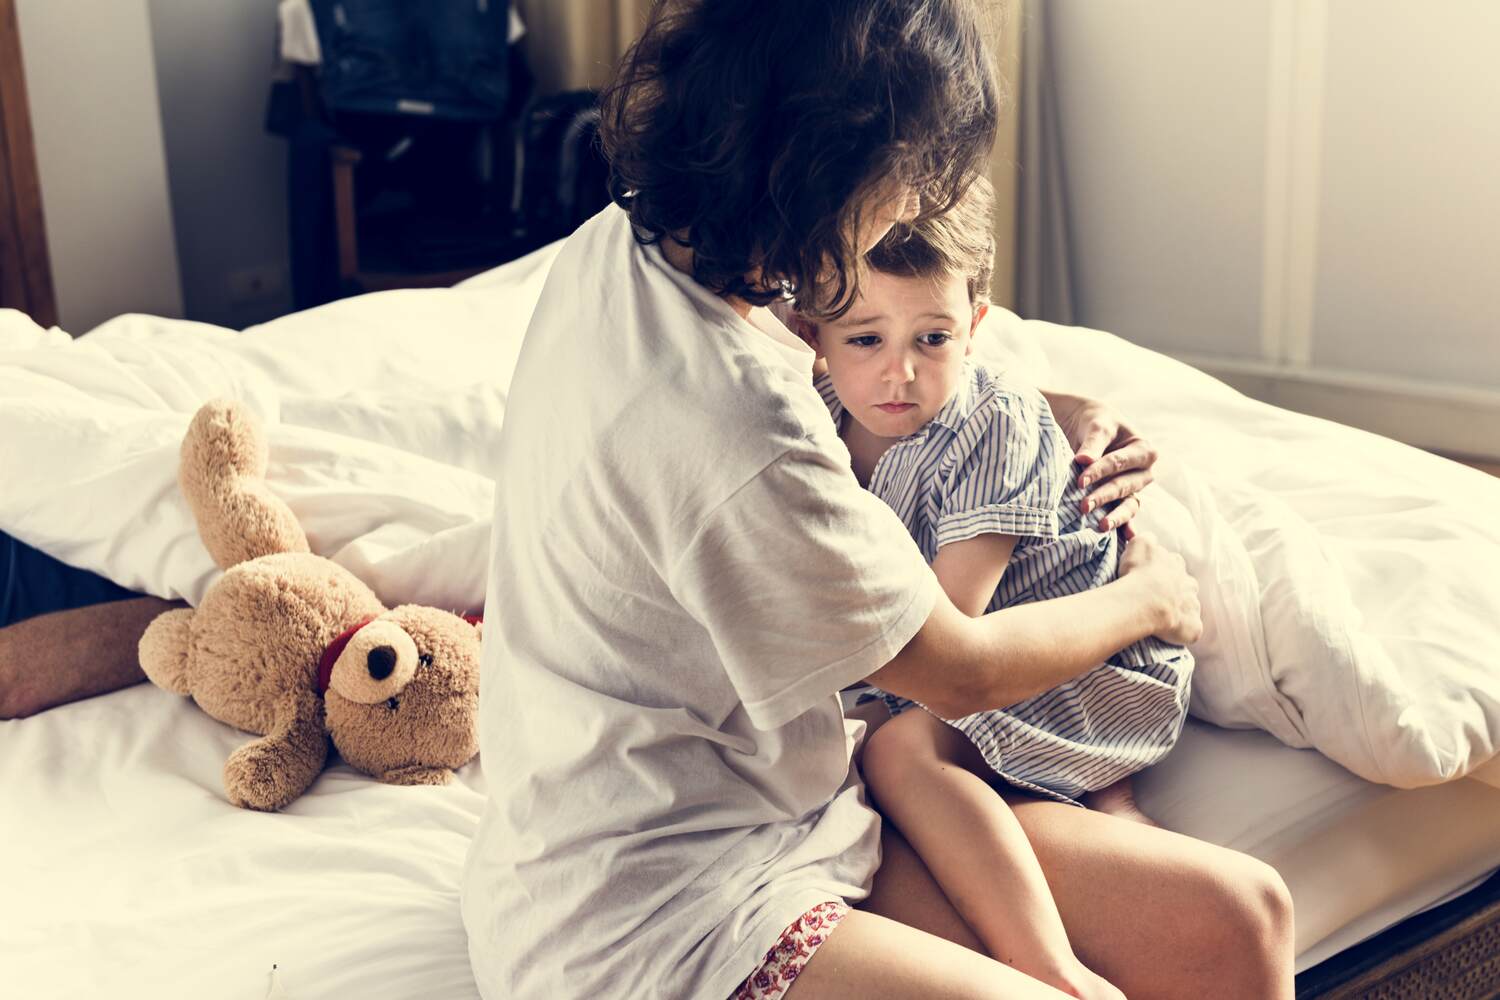 Reassure your toddler if they have nightmares